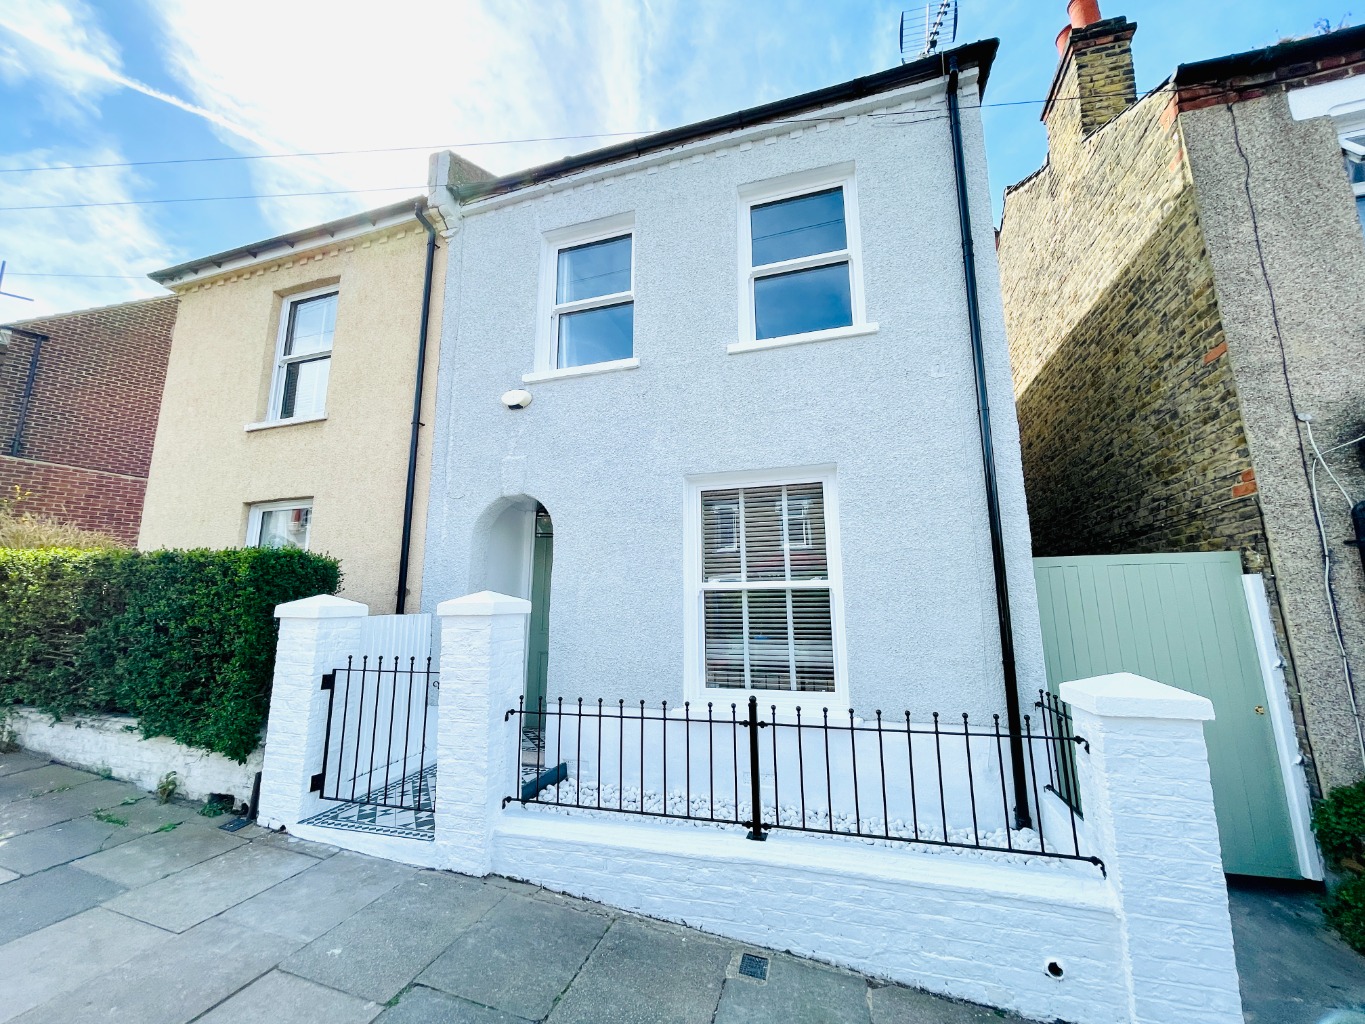 The property is located close to Winn’s Common and positioned approximately just over half a mile from Plumstead mainline railway station and 1.2 miles to Woolwich Arsenal DLR, overground line and forth coming Crossrail.